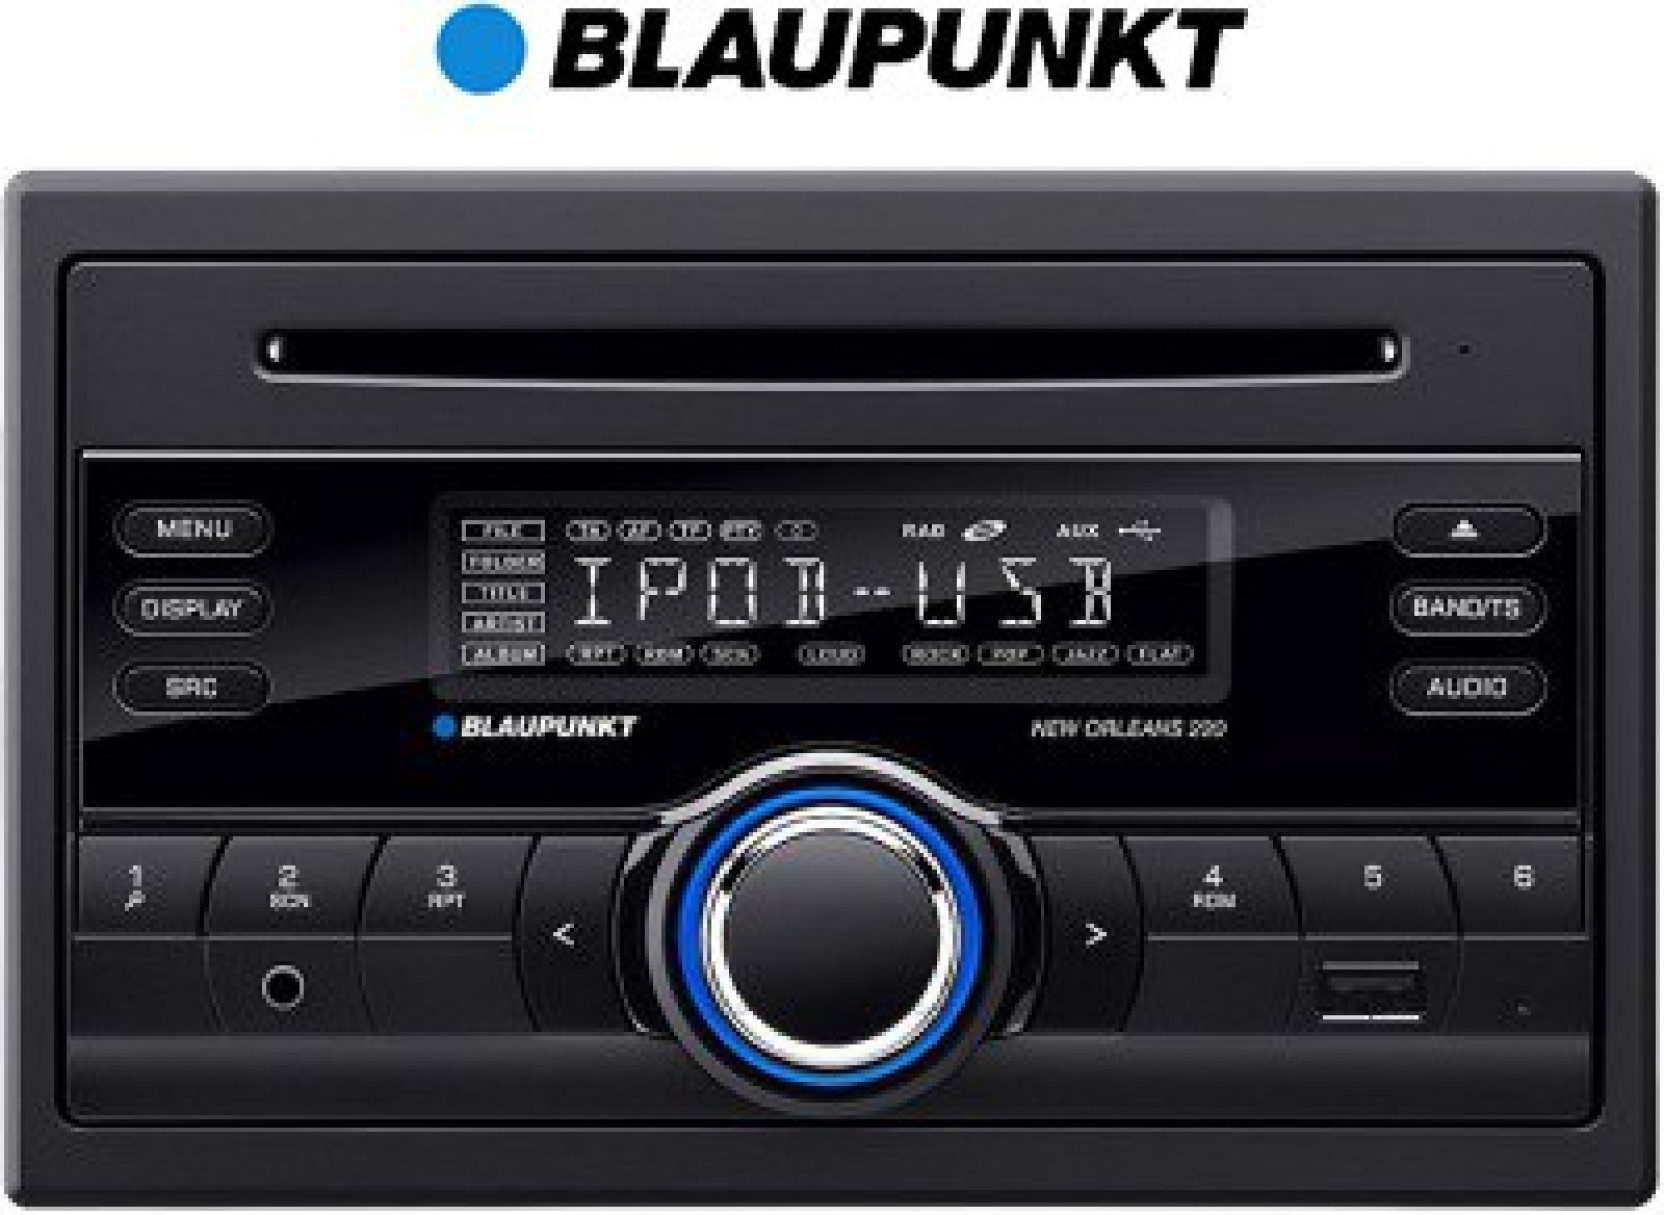 Blaupunkt New Orleans 220 Car Stereo Price in India Buy Blaupunkt New